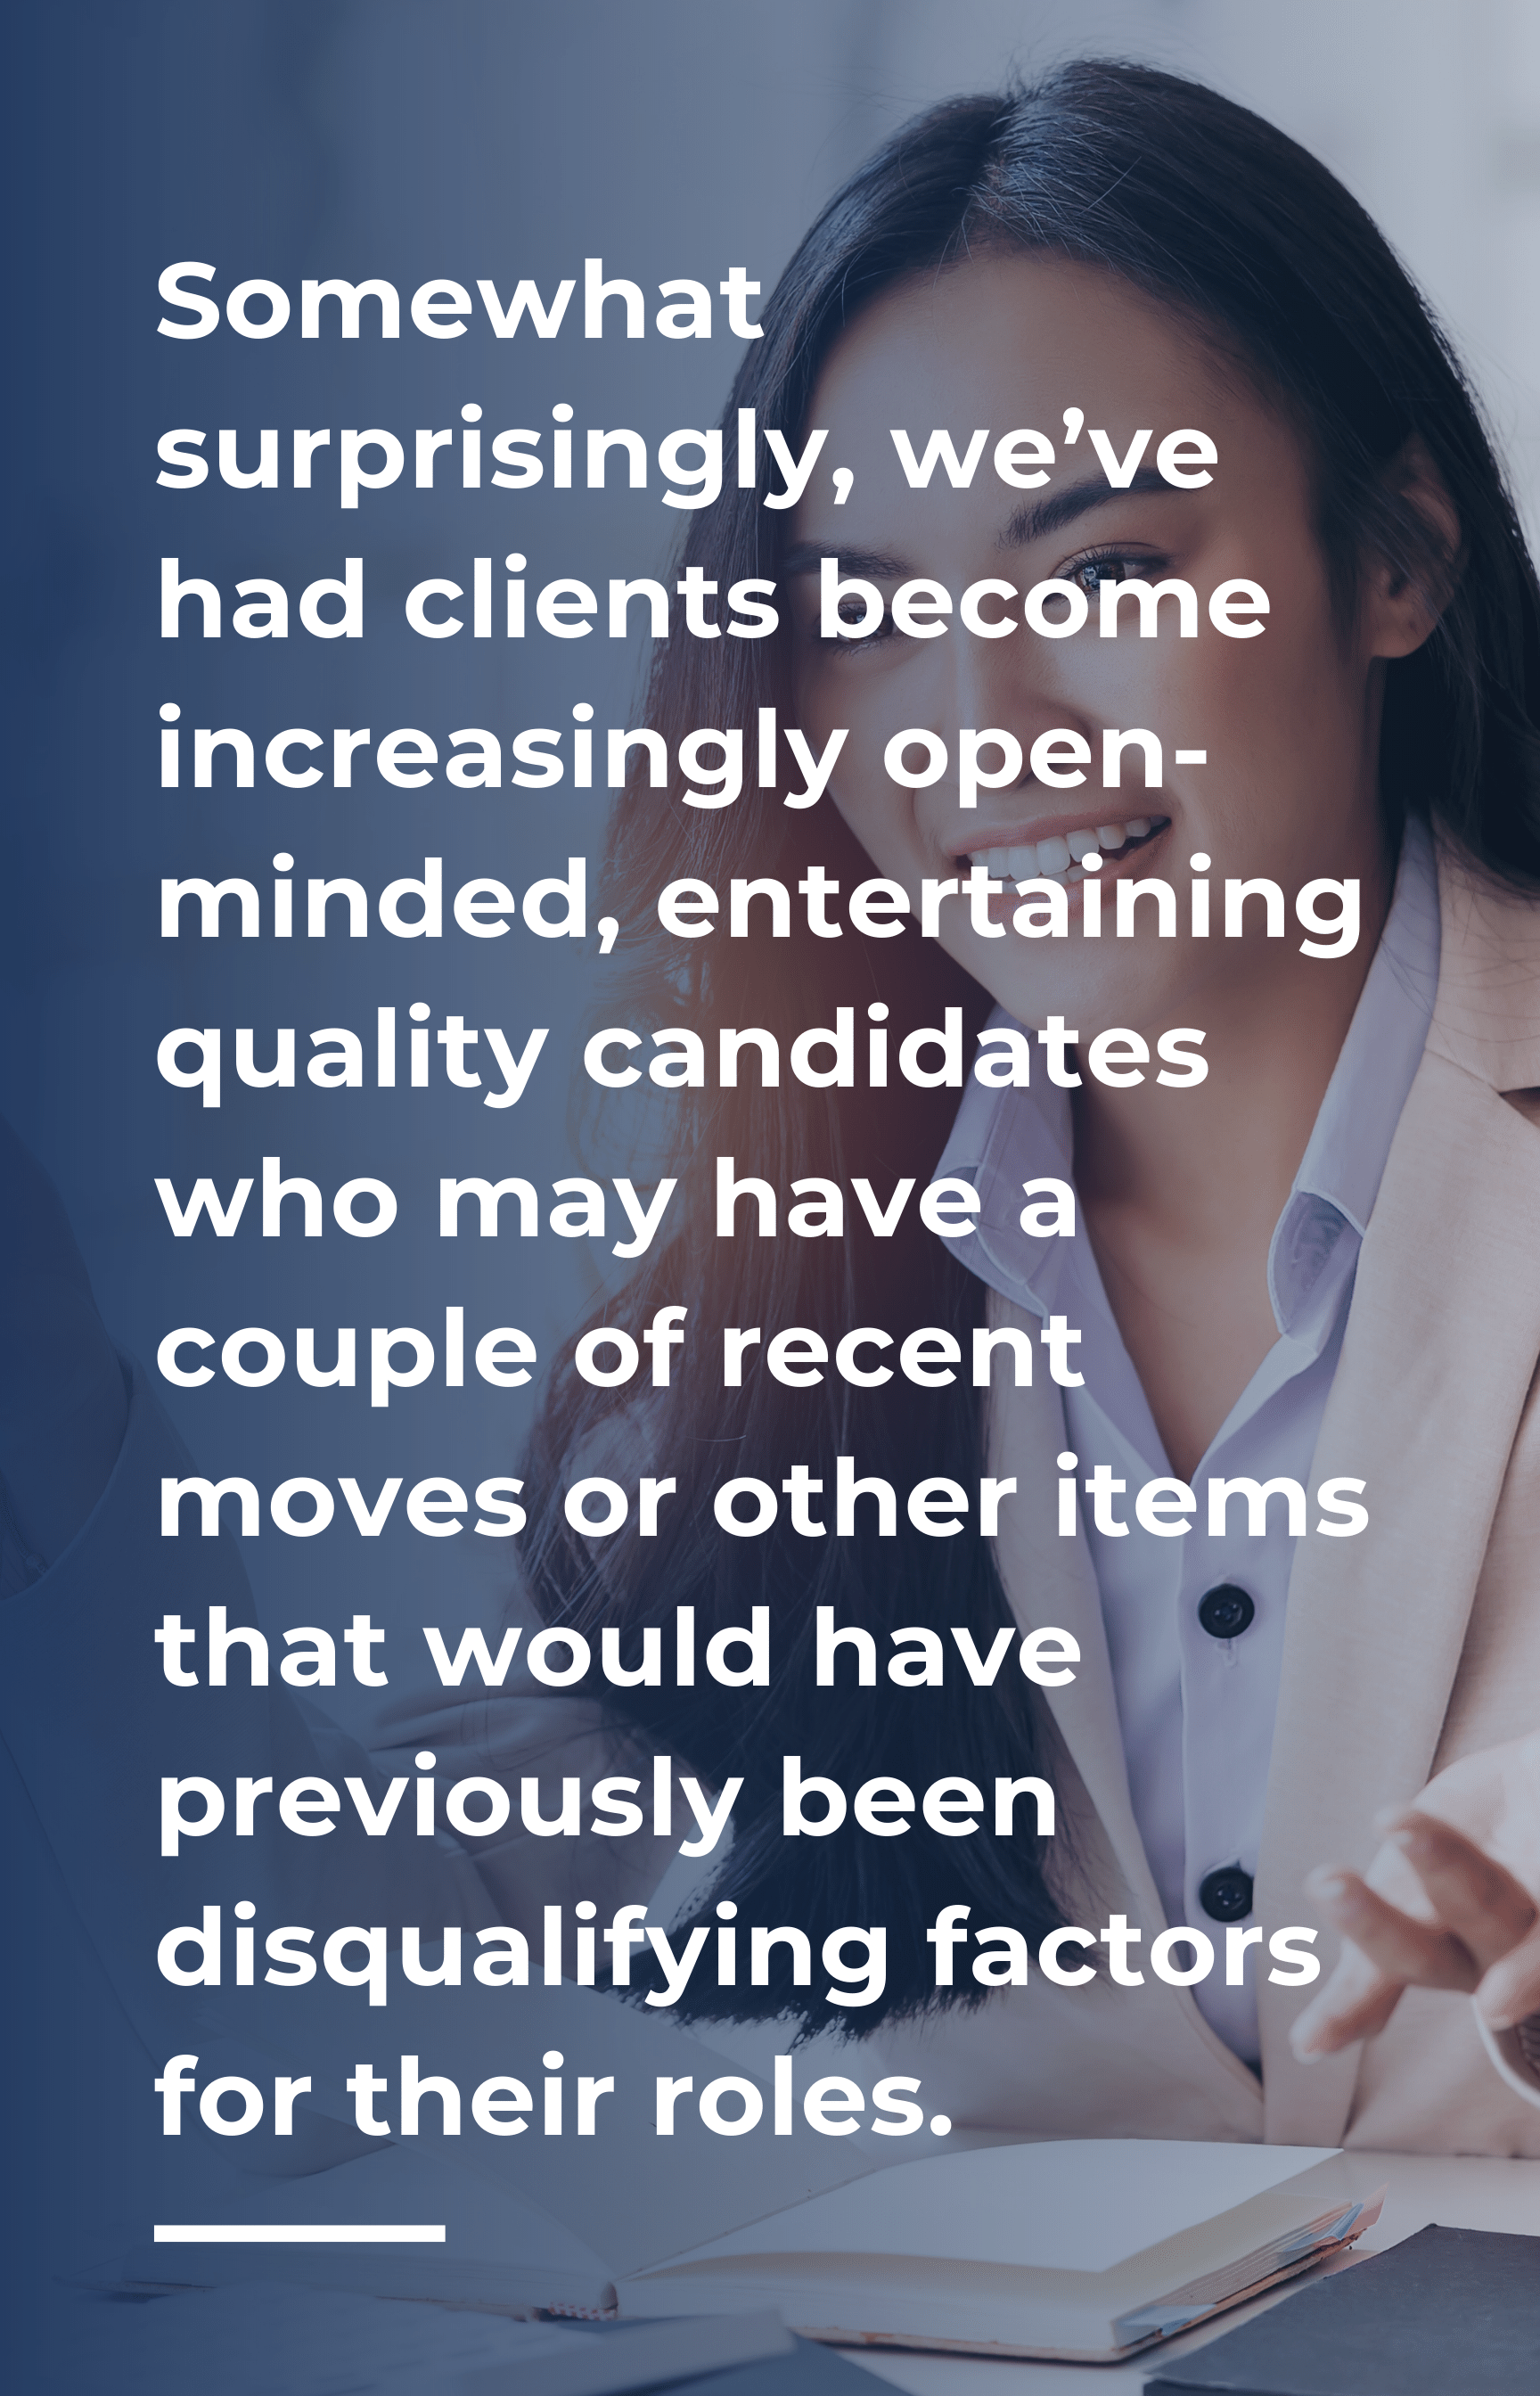 Somewhat surprisingly, we’ve had clients become increasingly open-minded, entertaining quality candidates who may have a couple of recent moves or other items that would have previously been disqualifying factors for their roles.